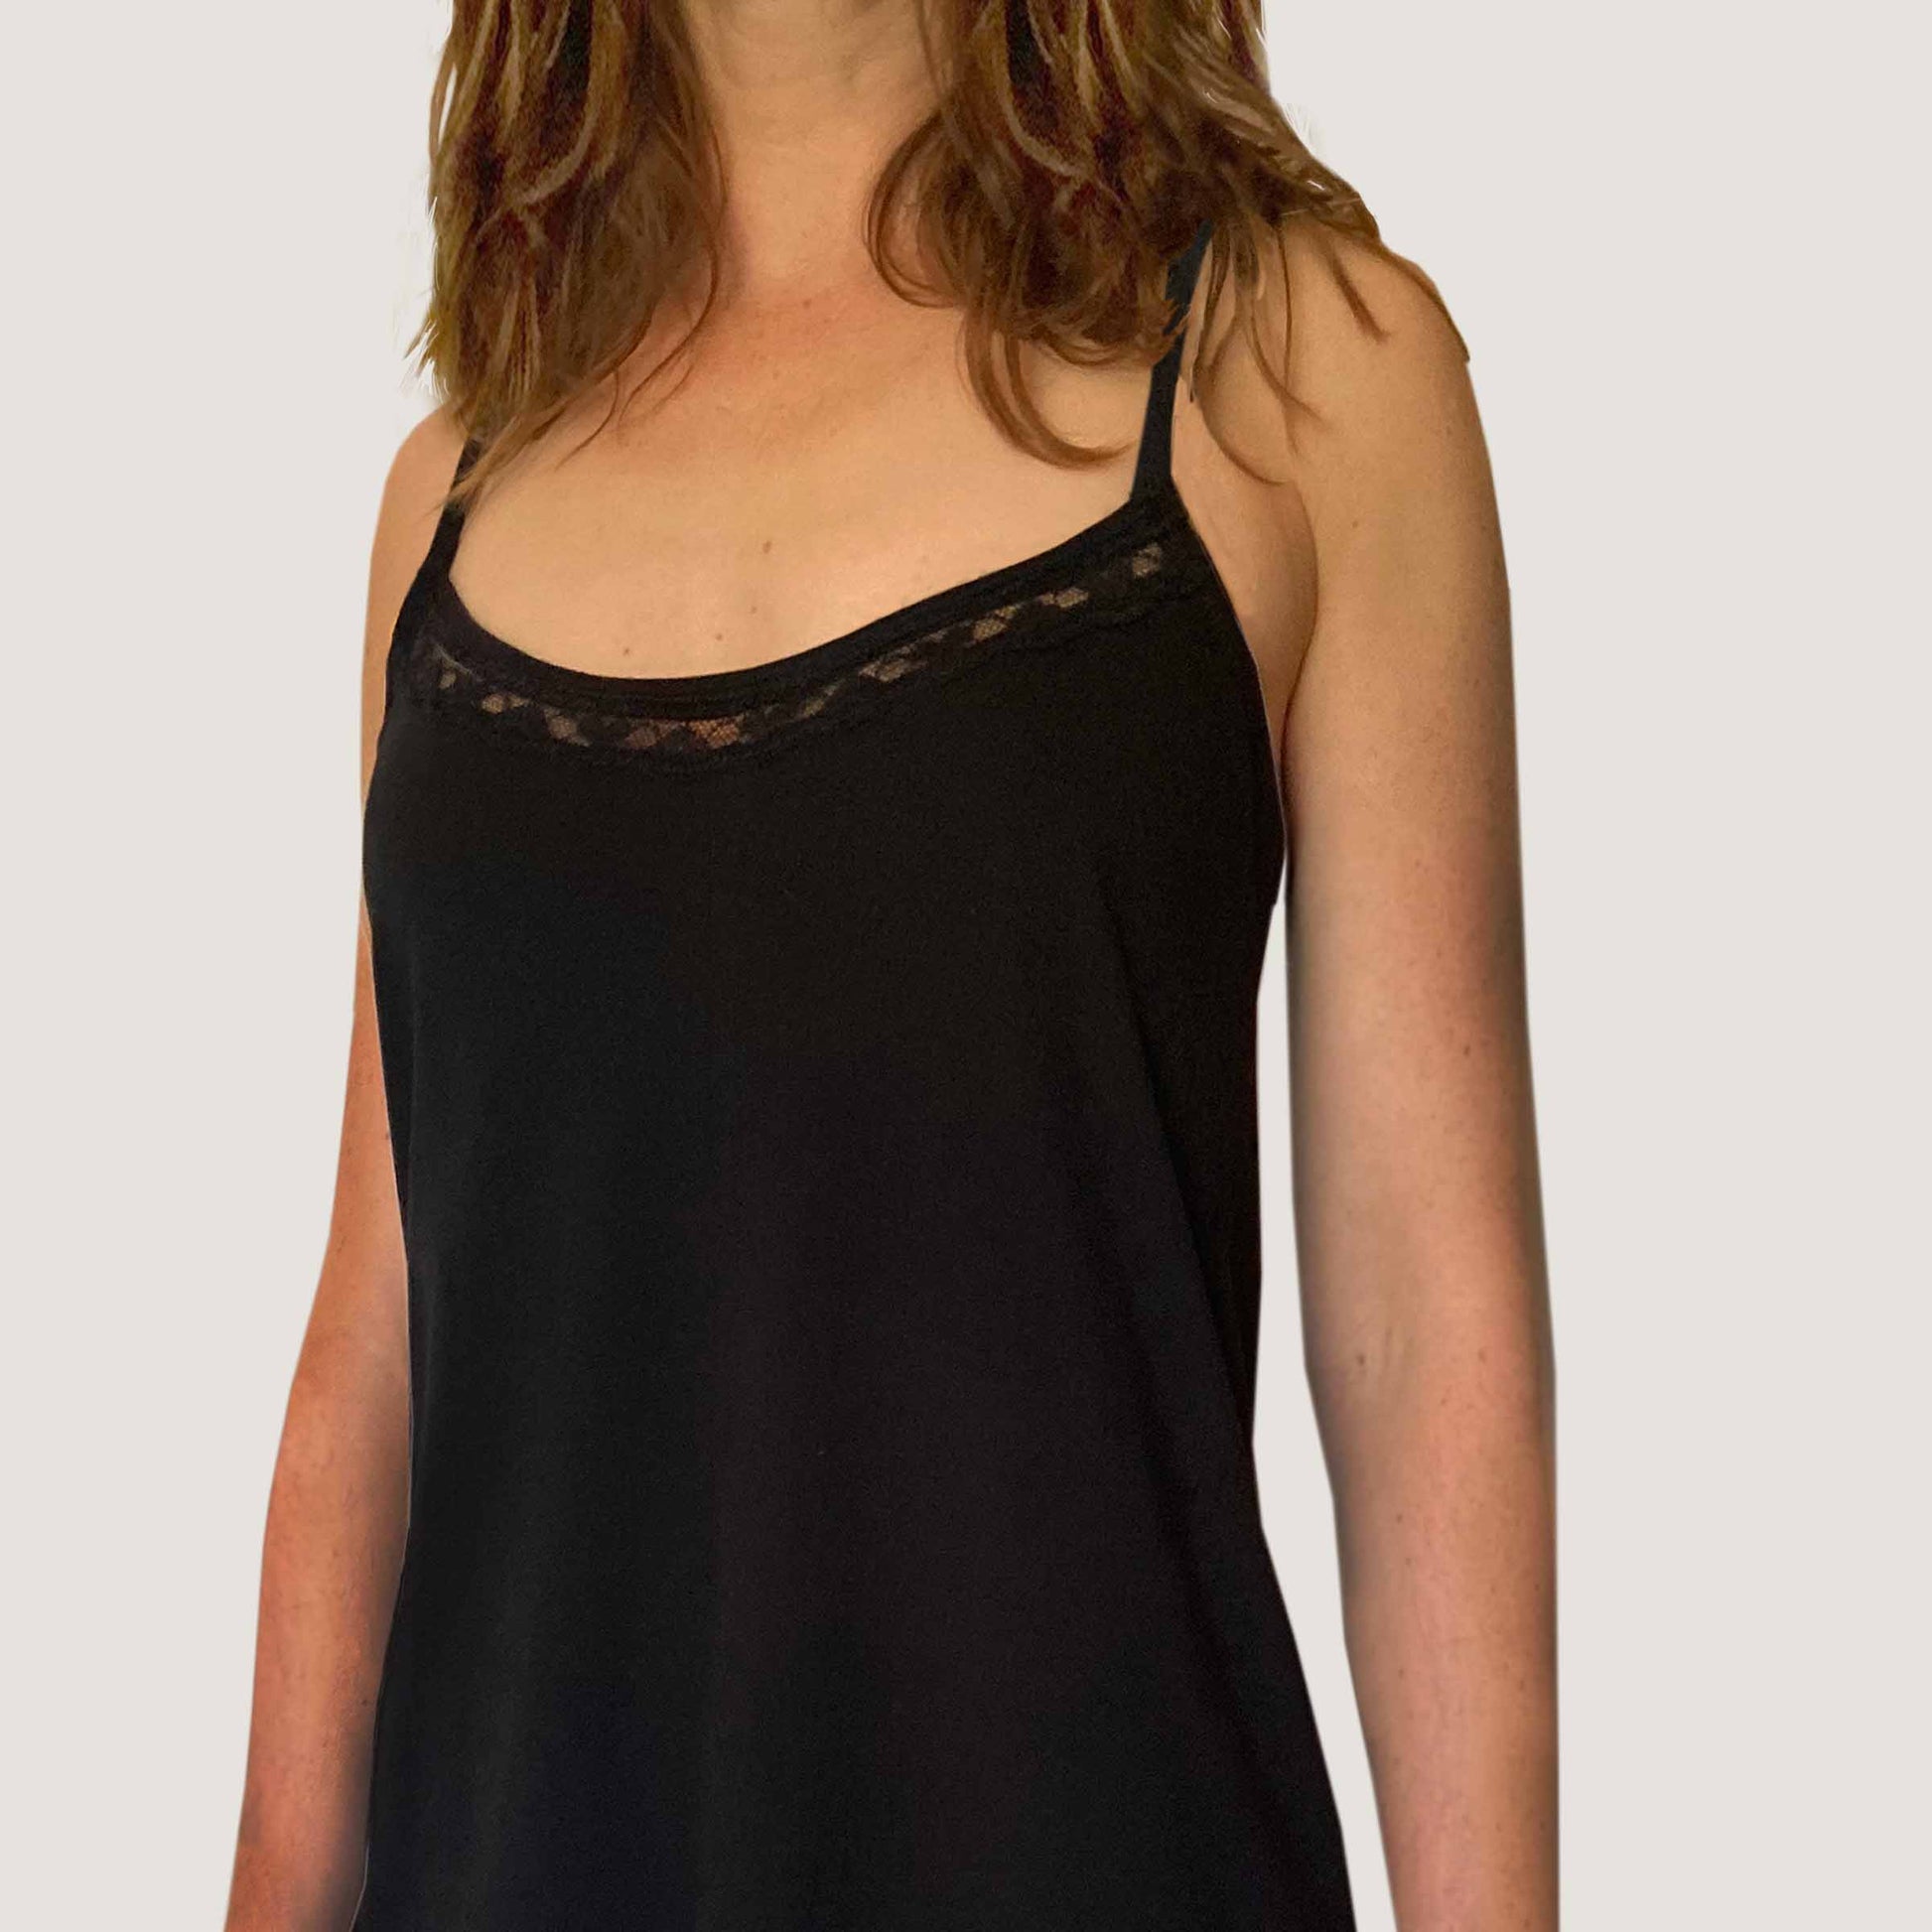 Womens nighties Australia. Cotton and lace nightgown made from certified organic cotton.